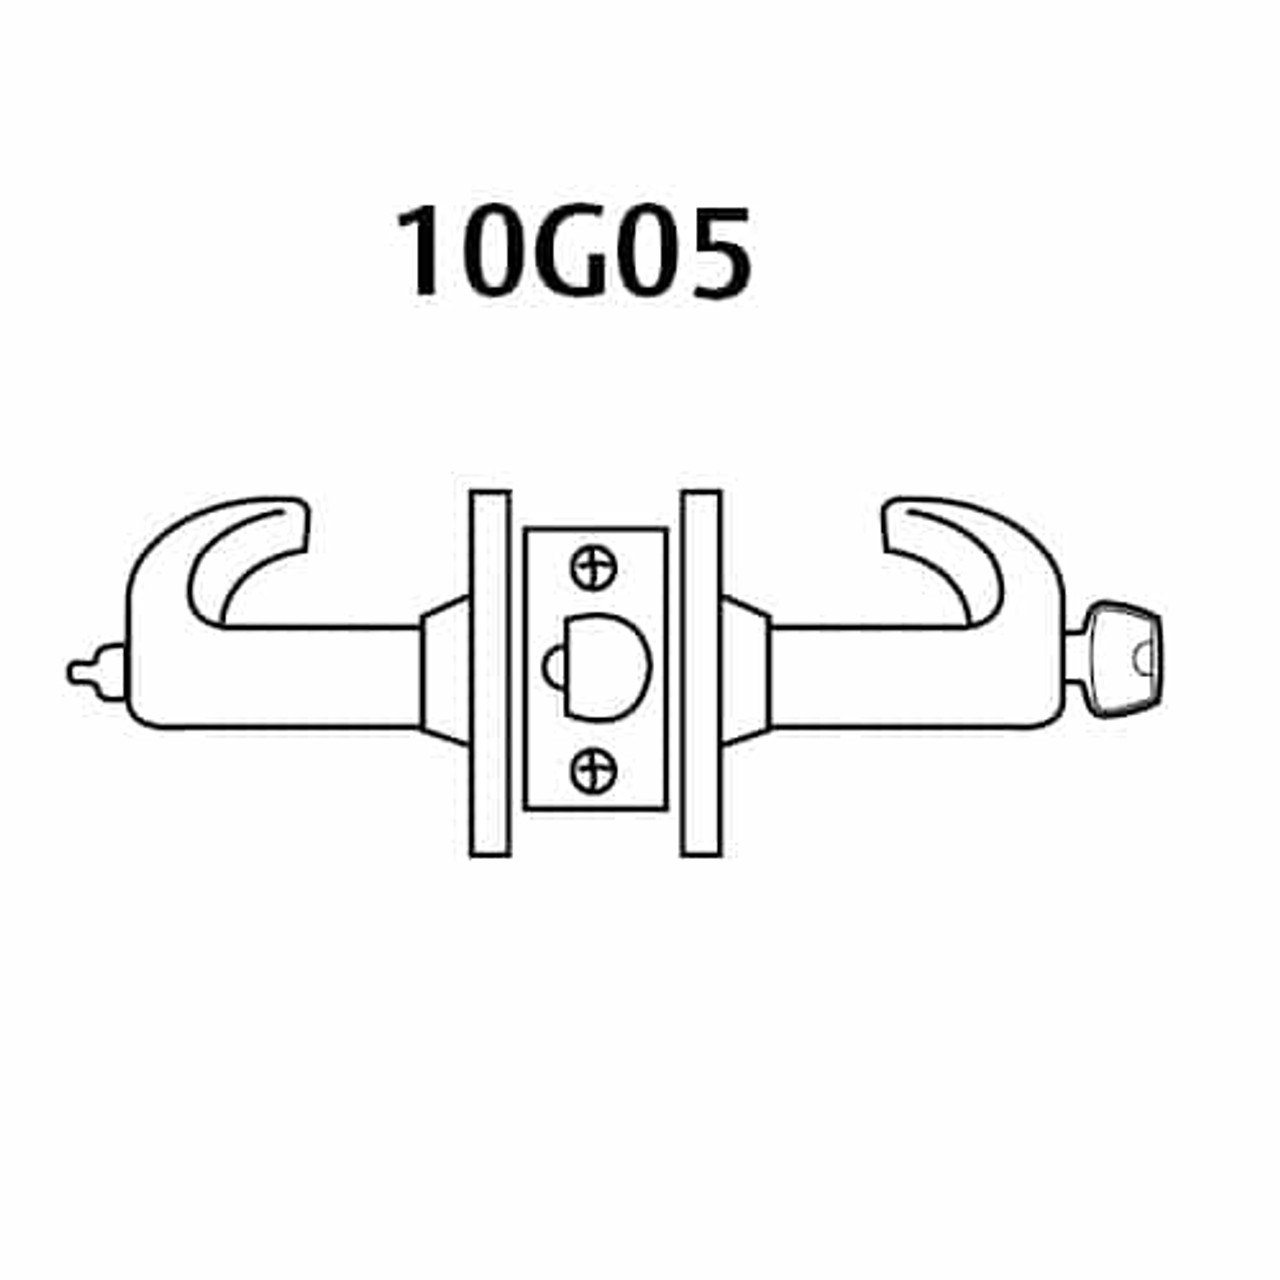 2860-10G05-LP-03 Sargent 10 Line Cylindrical Entry/Office Locks with P Lever Design and L Rose Prepped for LFIC in Bright Brass